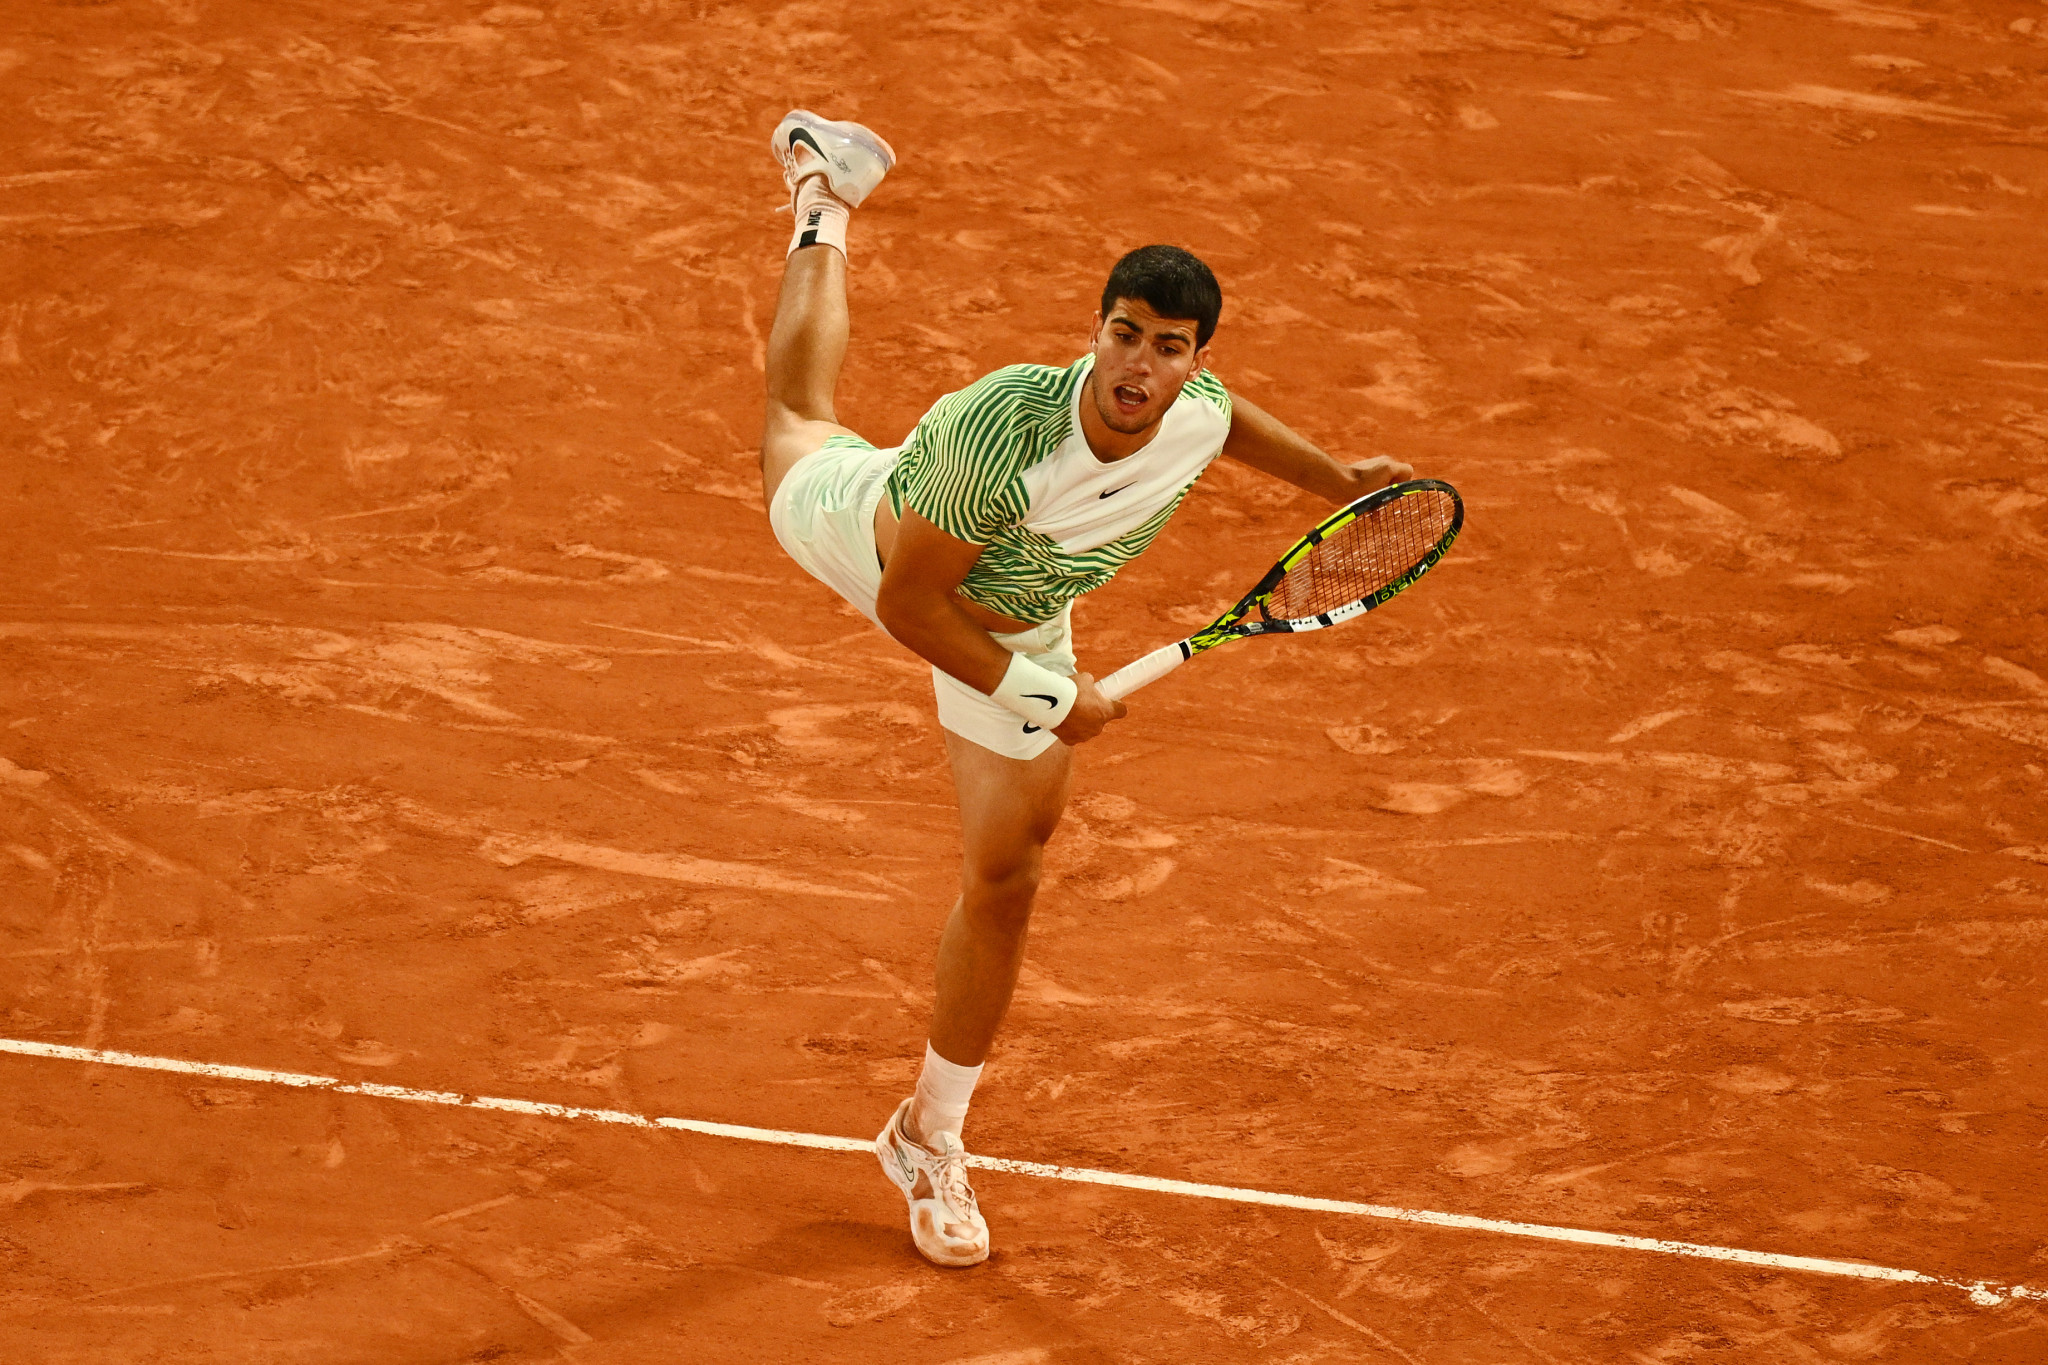 Carlos Alcaraz progressed in the French Open with victory over Denis Shapovalov ©Getty Images